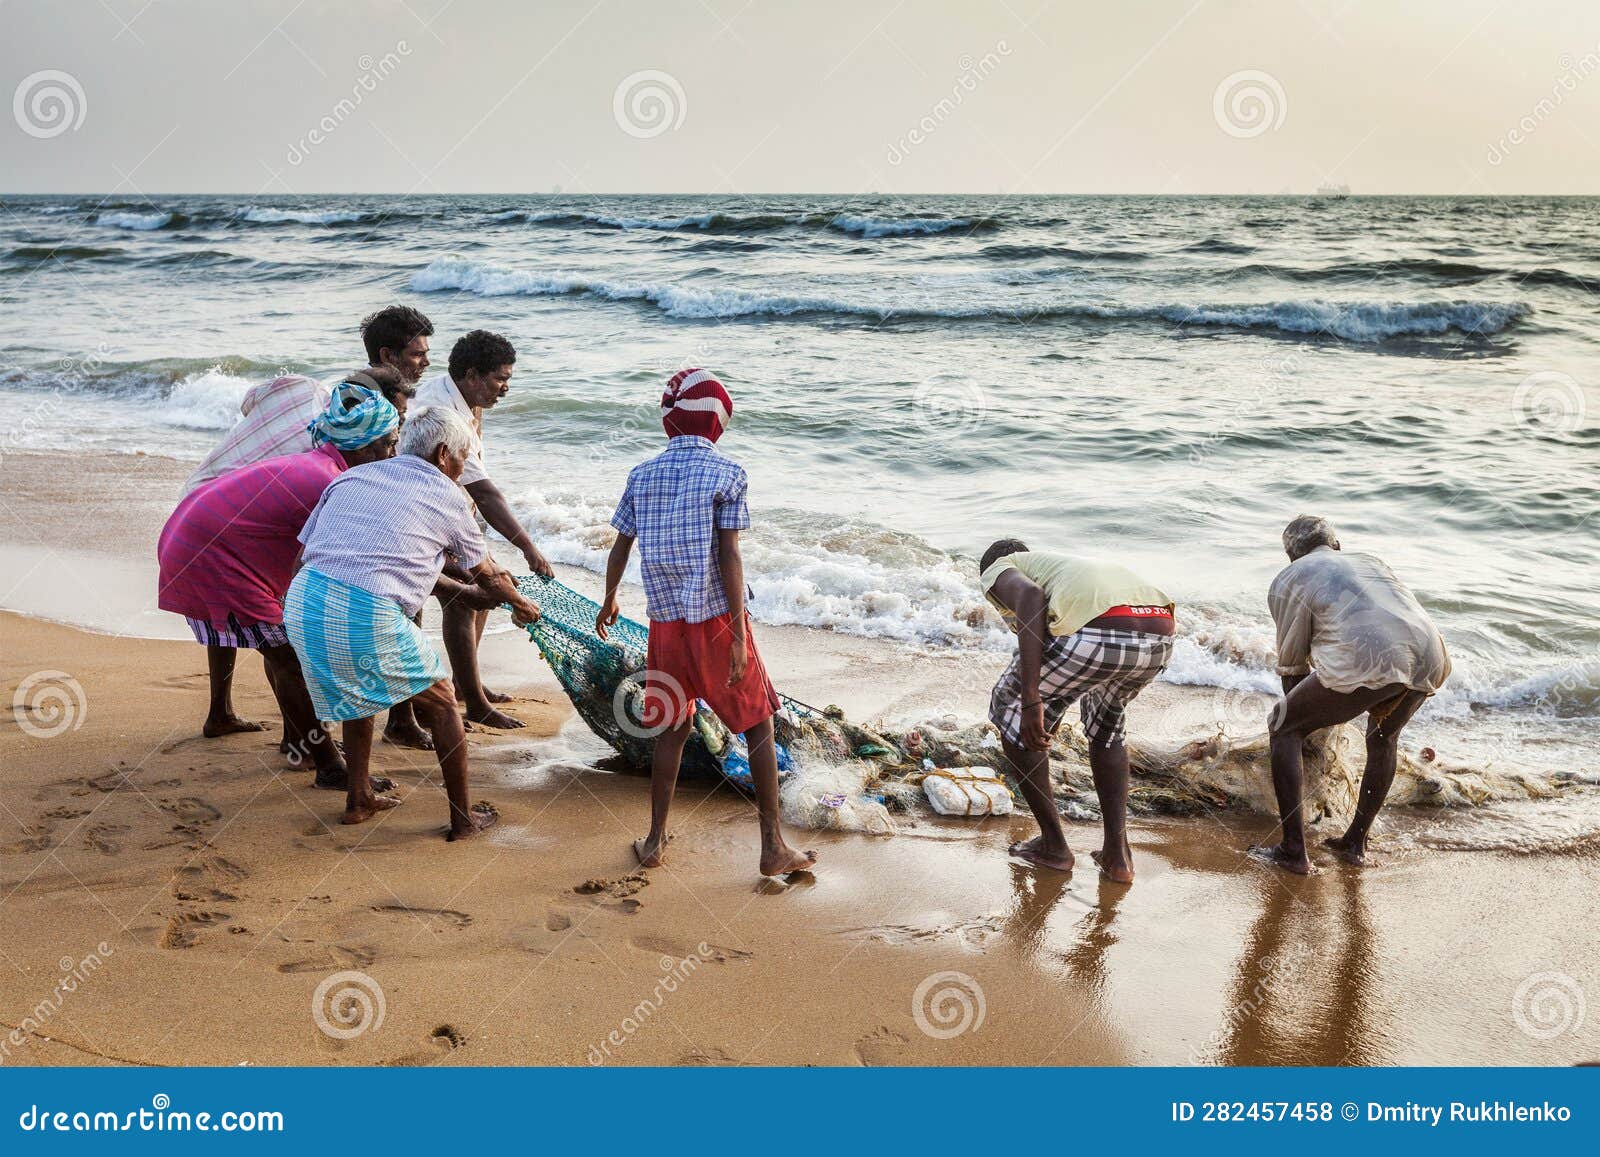 Indian Fishermen Dragging Fishing Net with Their Catch from Sea on